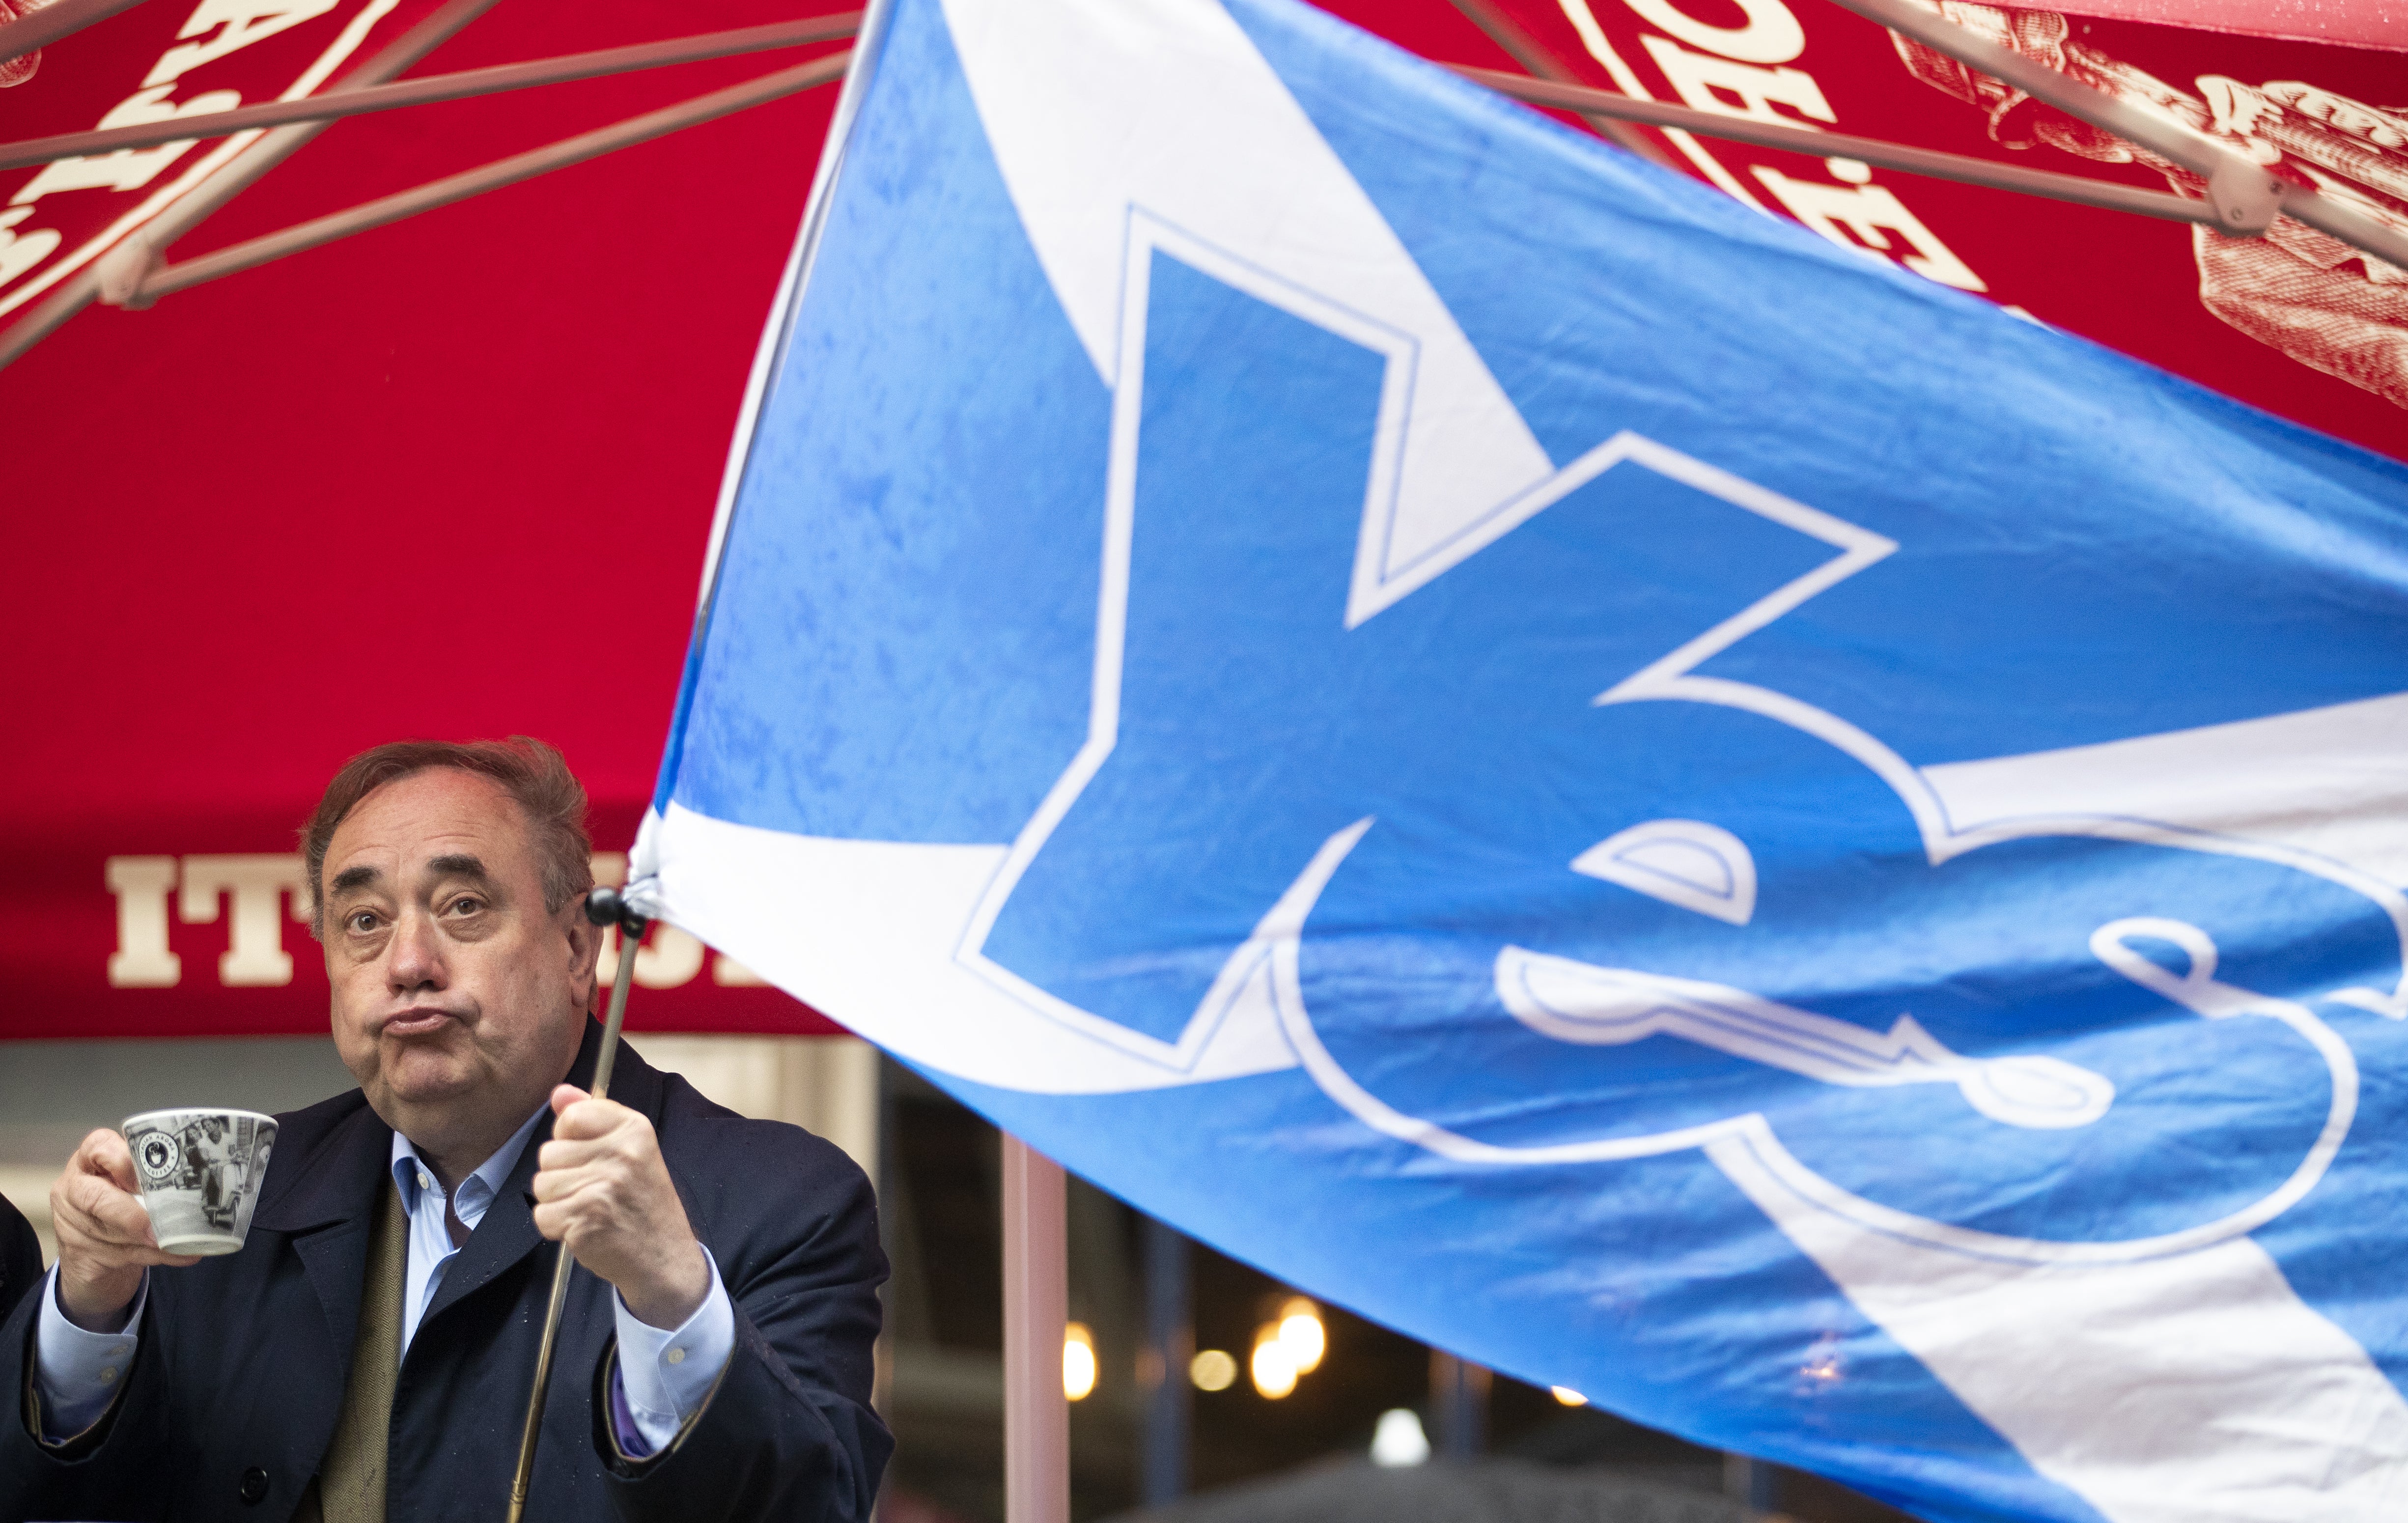 Alba Party leader Alex Salmond during a visit to the Scotsman Lounge in Edinburgh on the campaign trail. Alba failed to take a seat at Holyrood (Jane Barlow/PA)